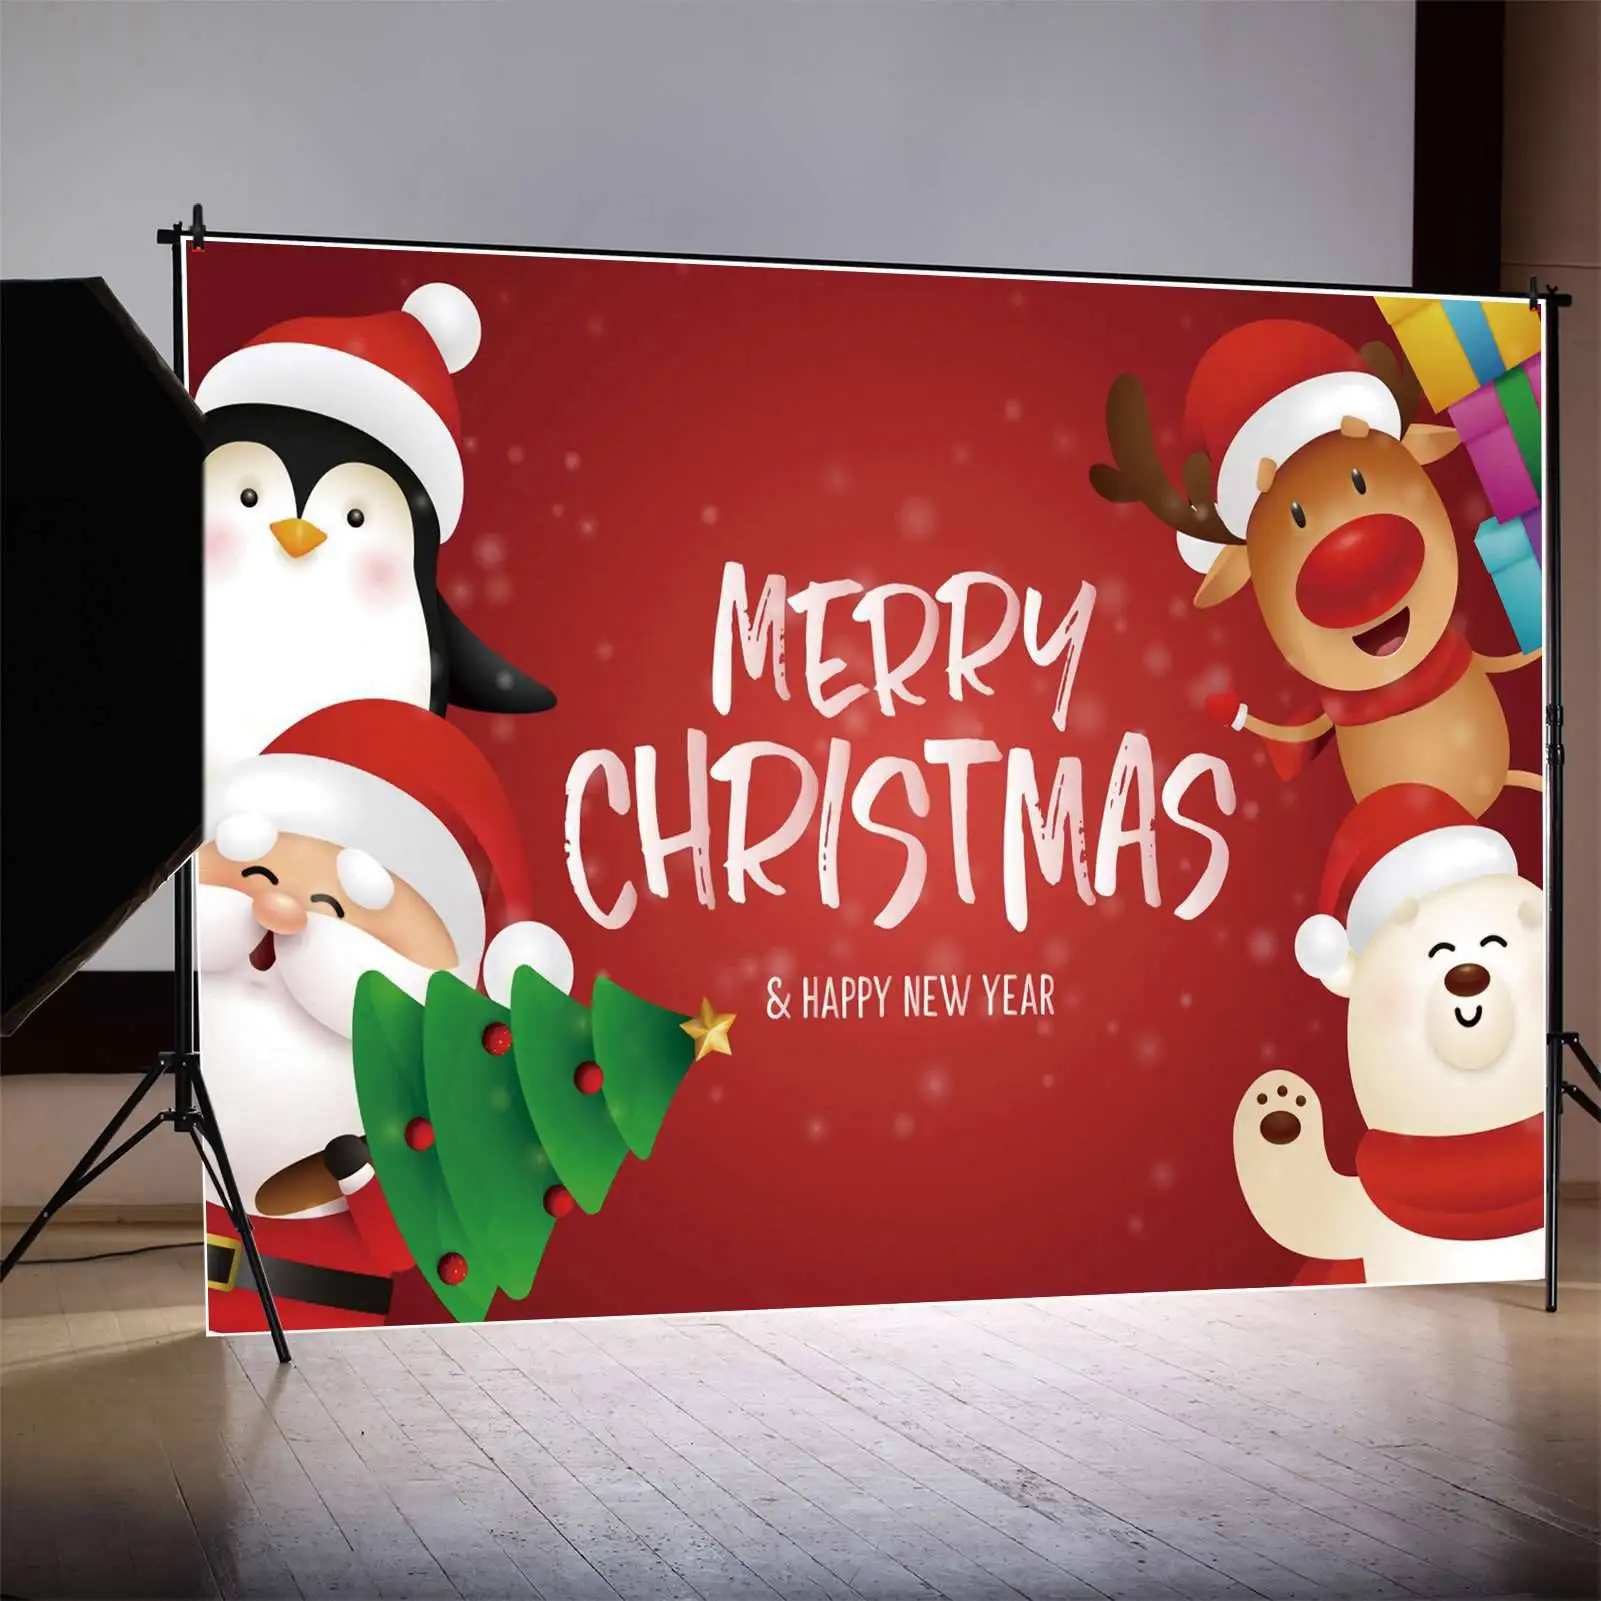 

MOON.QG Backdrop Red Merry Christmas Banner Teddy Bear Santa Claus Decor Background Children Reindeer Penguin Photo Booth Props